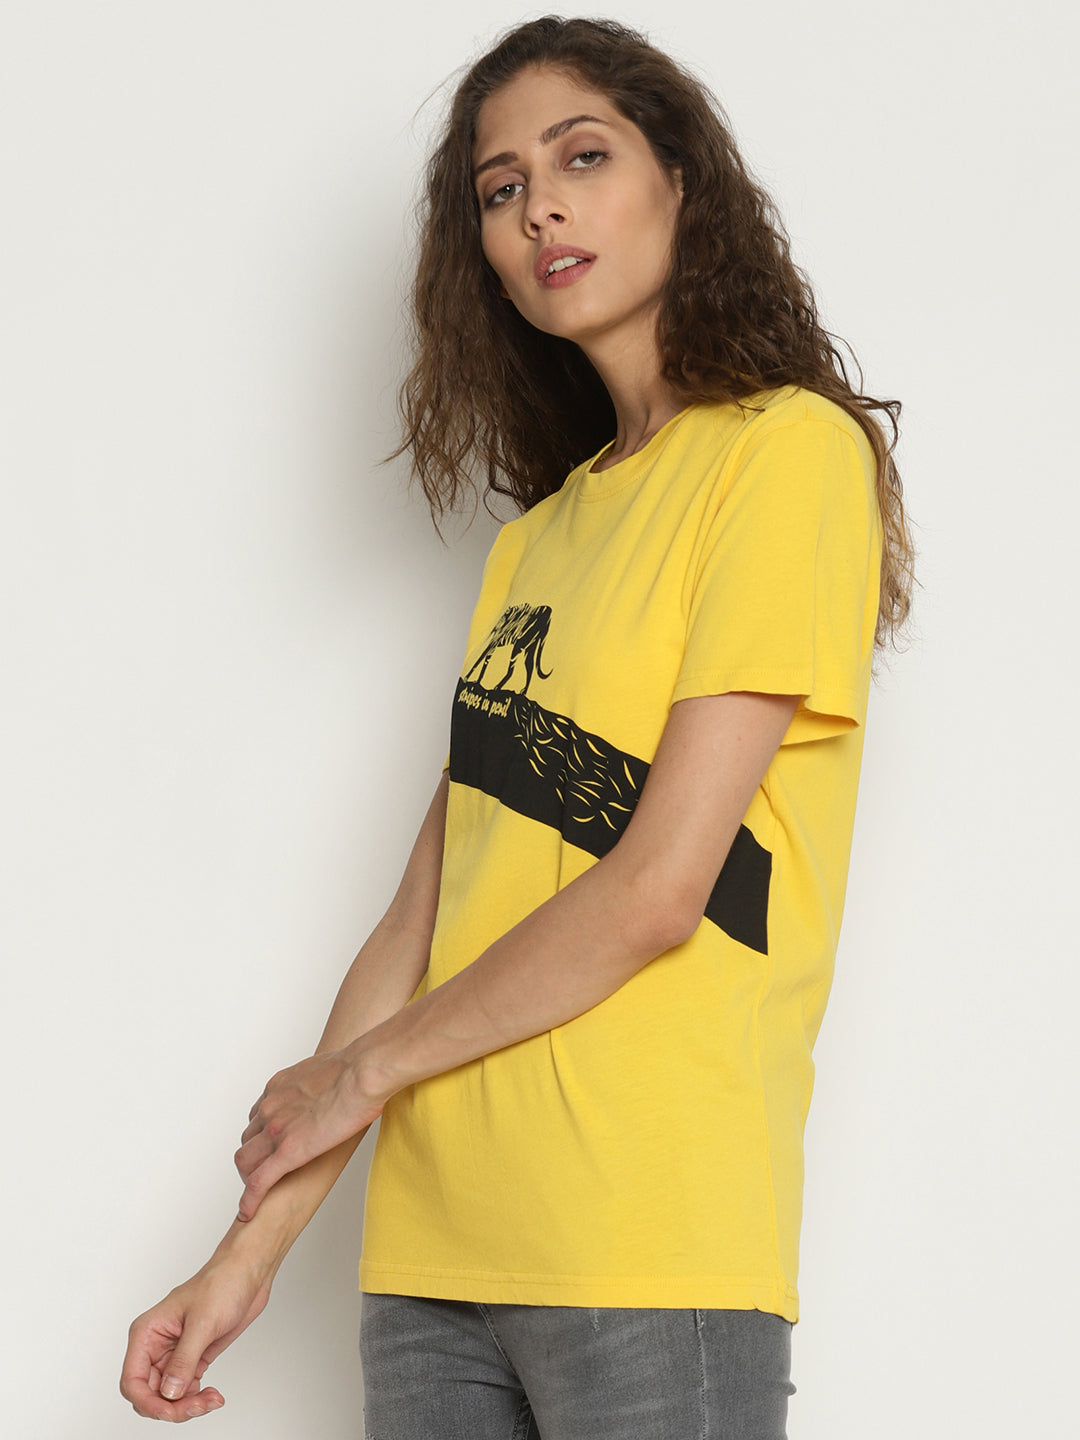 Wolfpack Stripes In Peril Yellow Printed Women T-Shirt